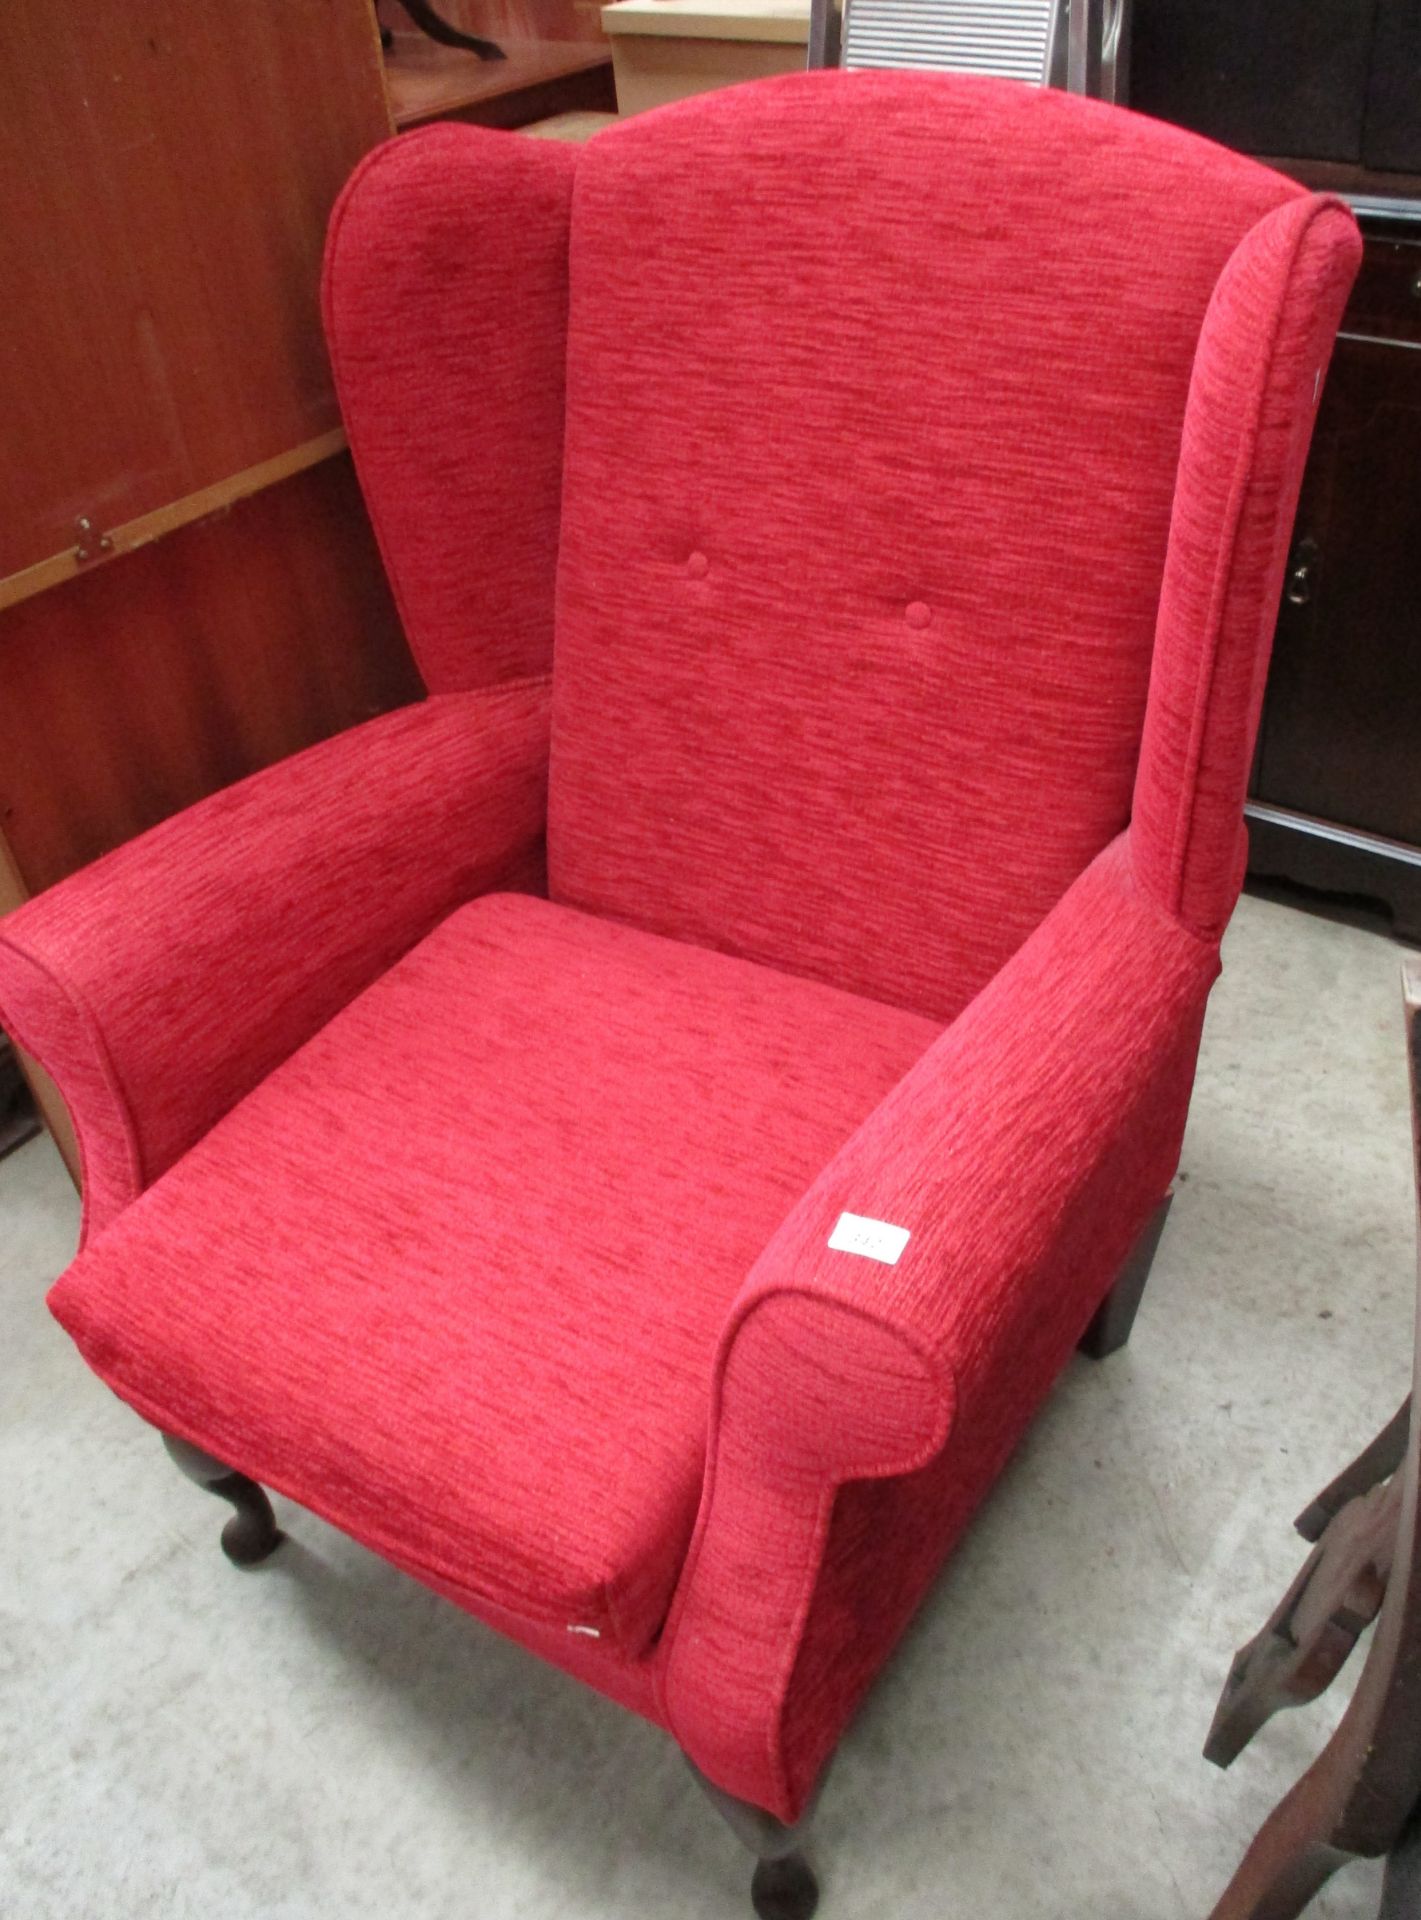 A red moquette upholstered armchair